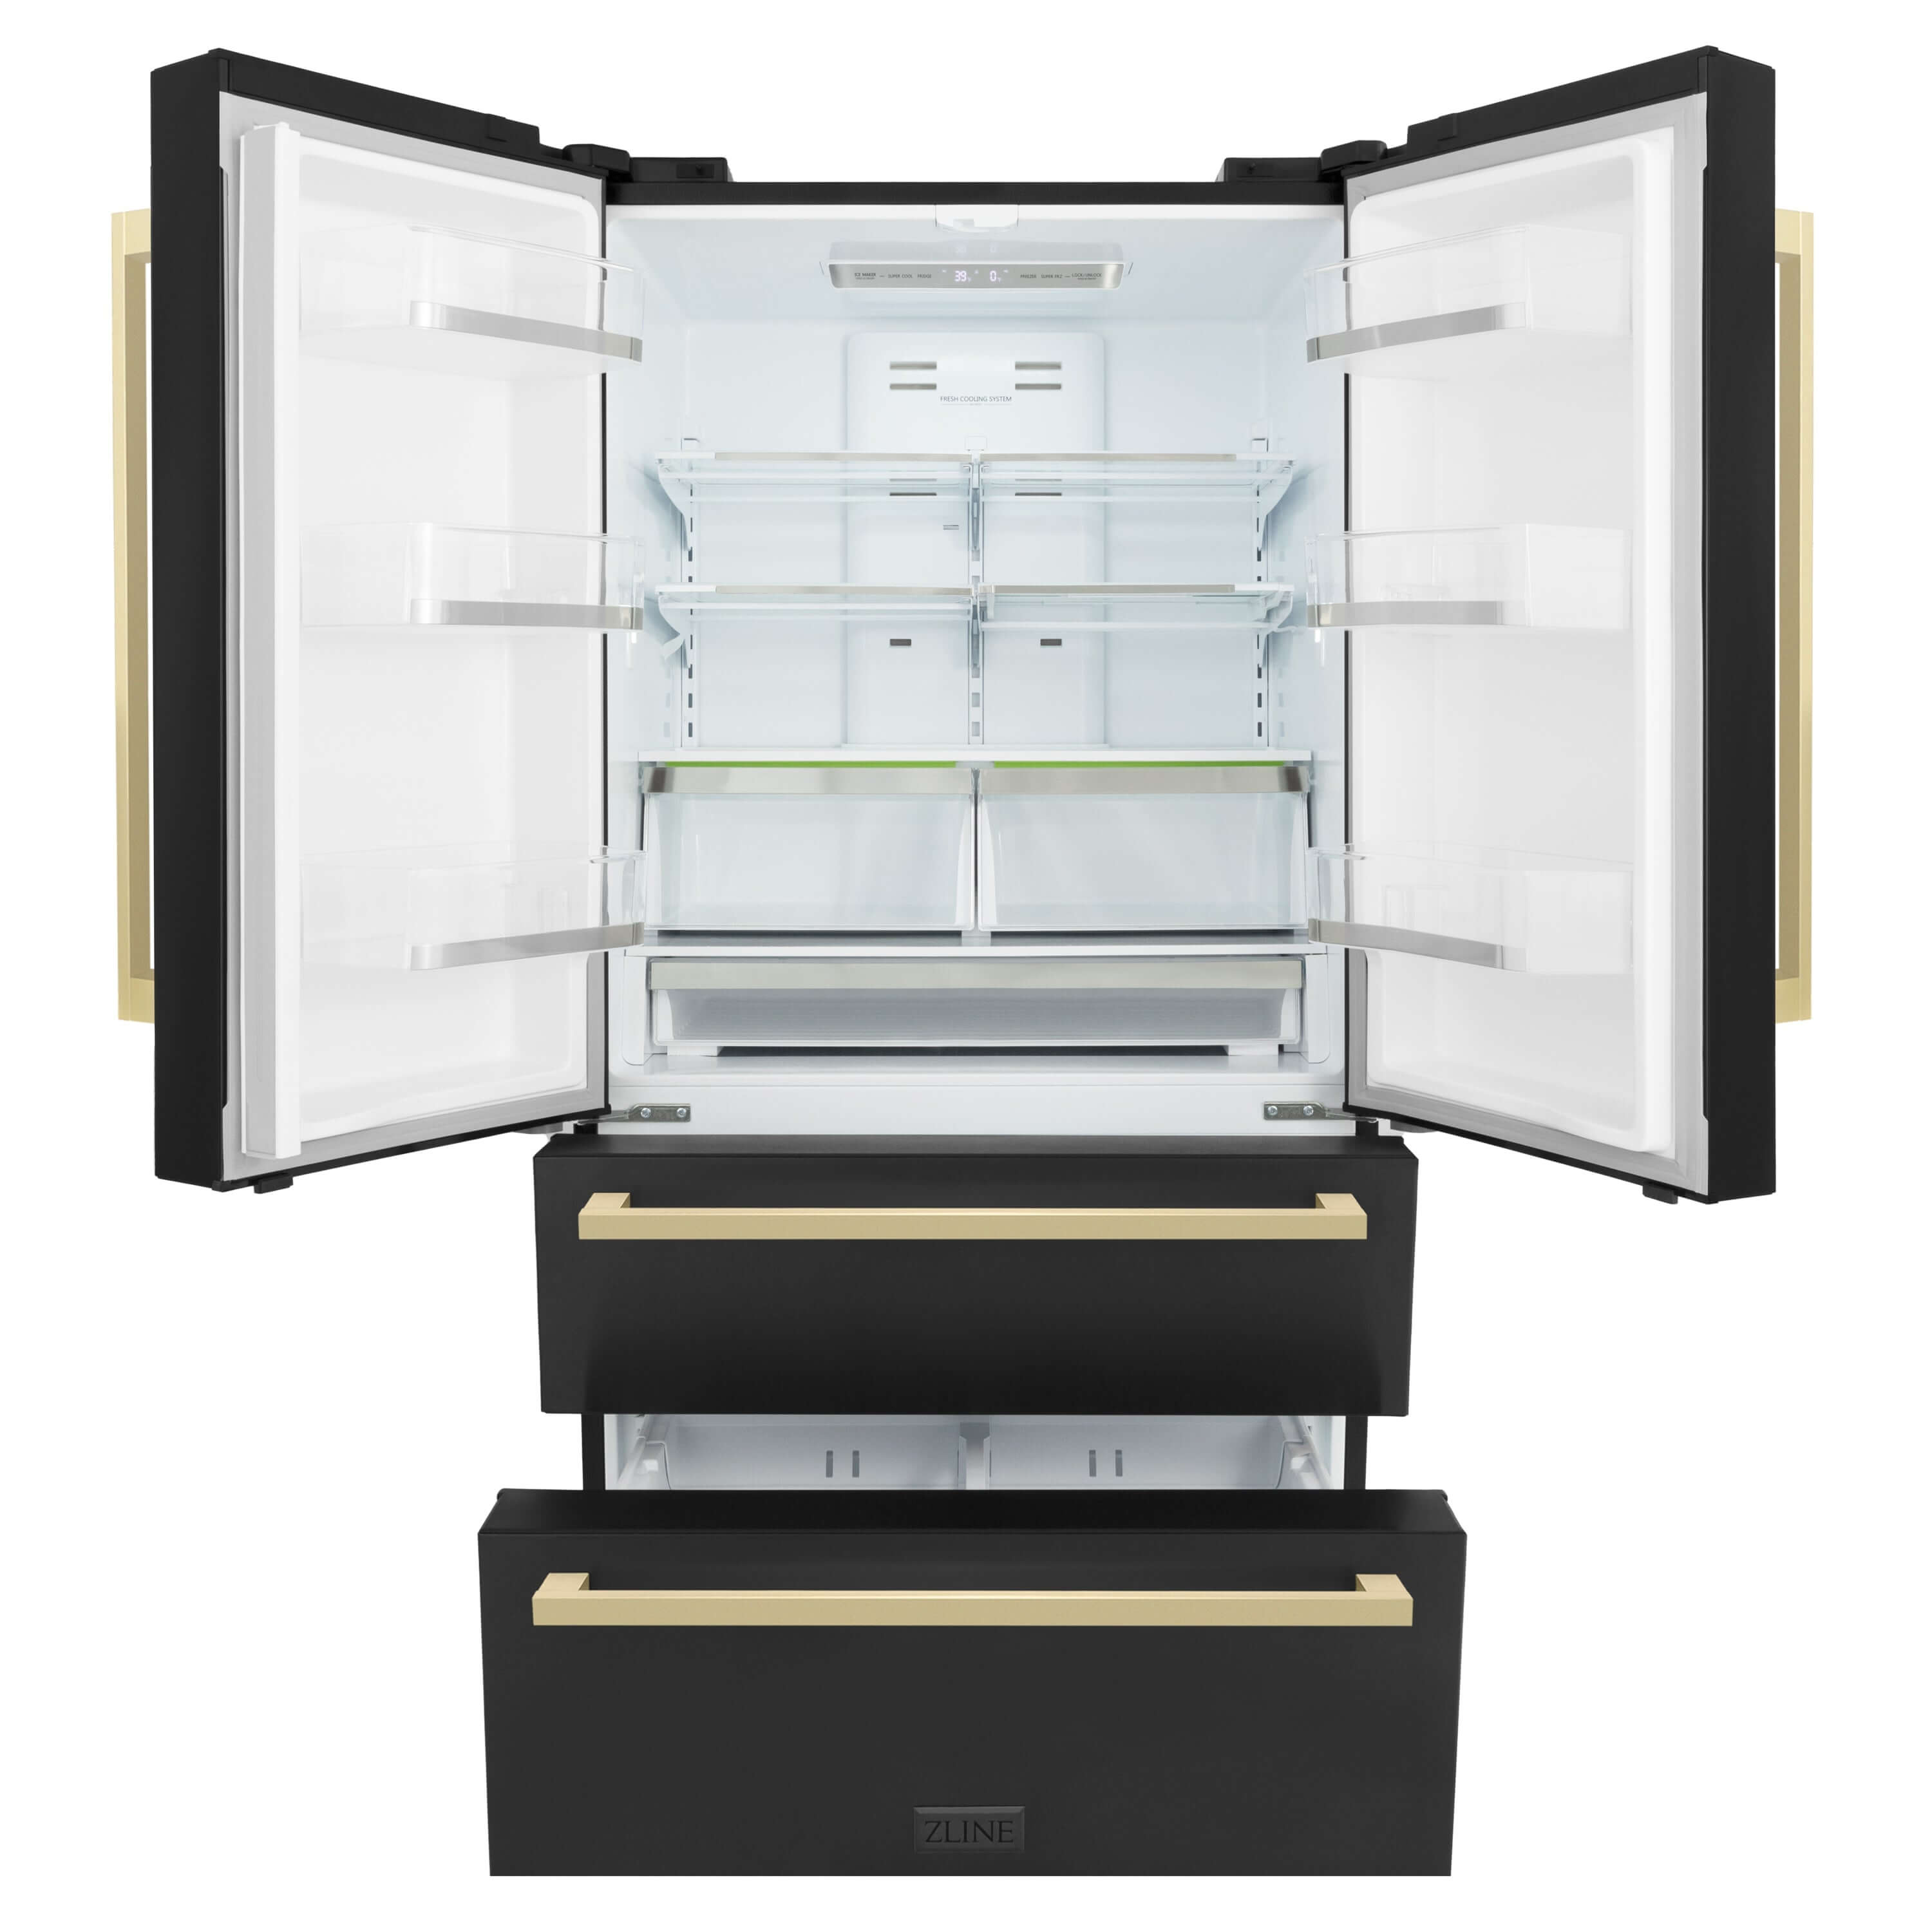 ZLINE Autograph Edition 36 in. 22.5 cu. ft 4-Door French Door Refrigerator with Ice Maker in Black Stainless Steel with Champagne Bronze Square Handles (RFMZ-36-BS-FCB) front, refrigeration compartment and bottom freezers open.